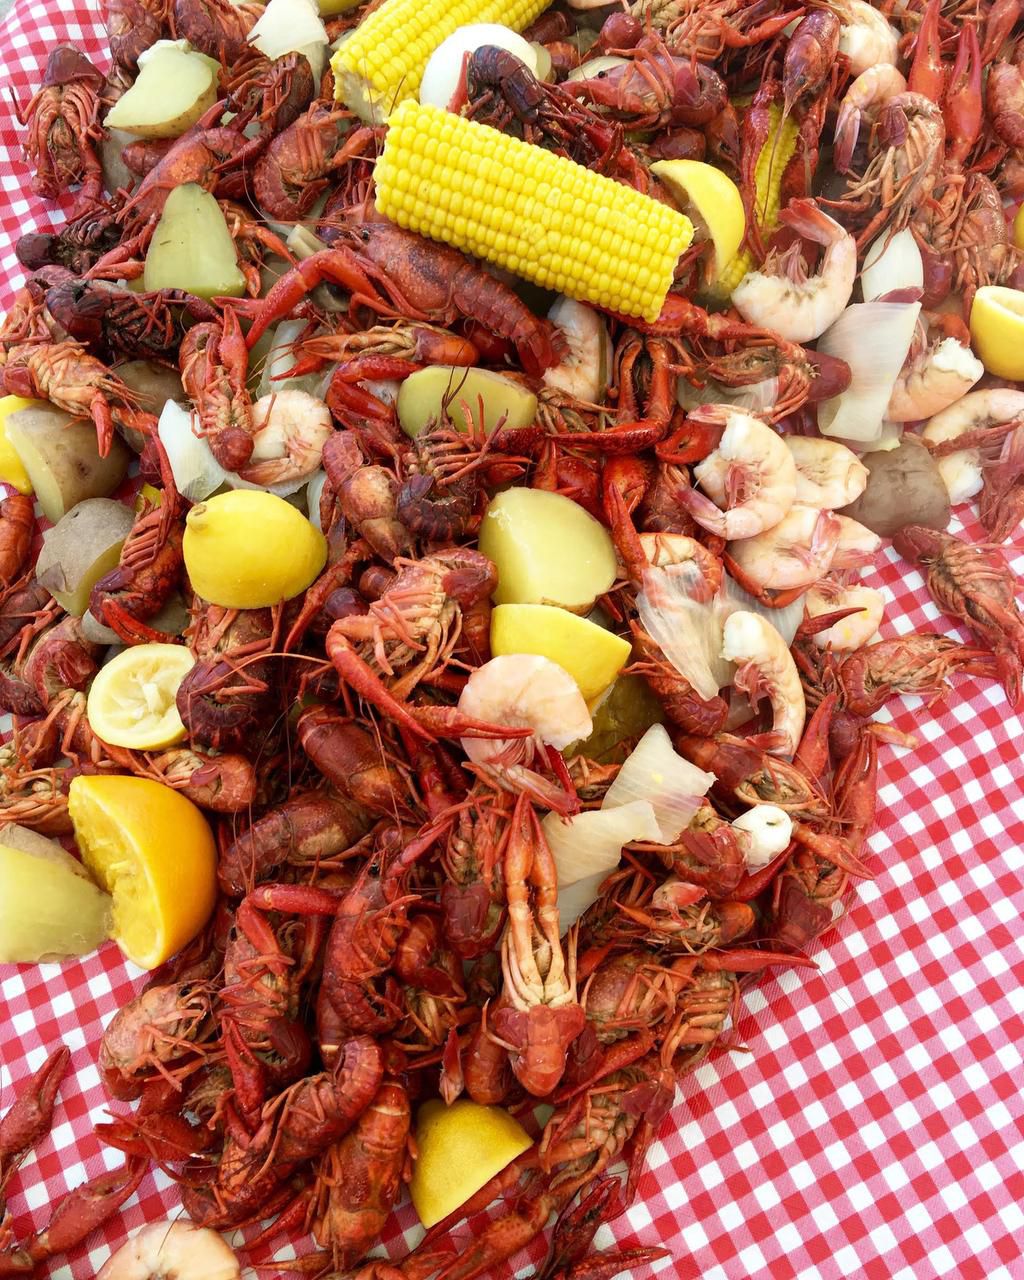 Astros Crawfish Boil: March 20, 2023 - The Crawfish Boxes